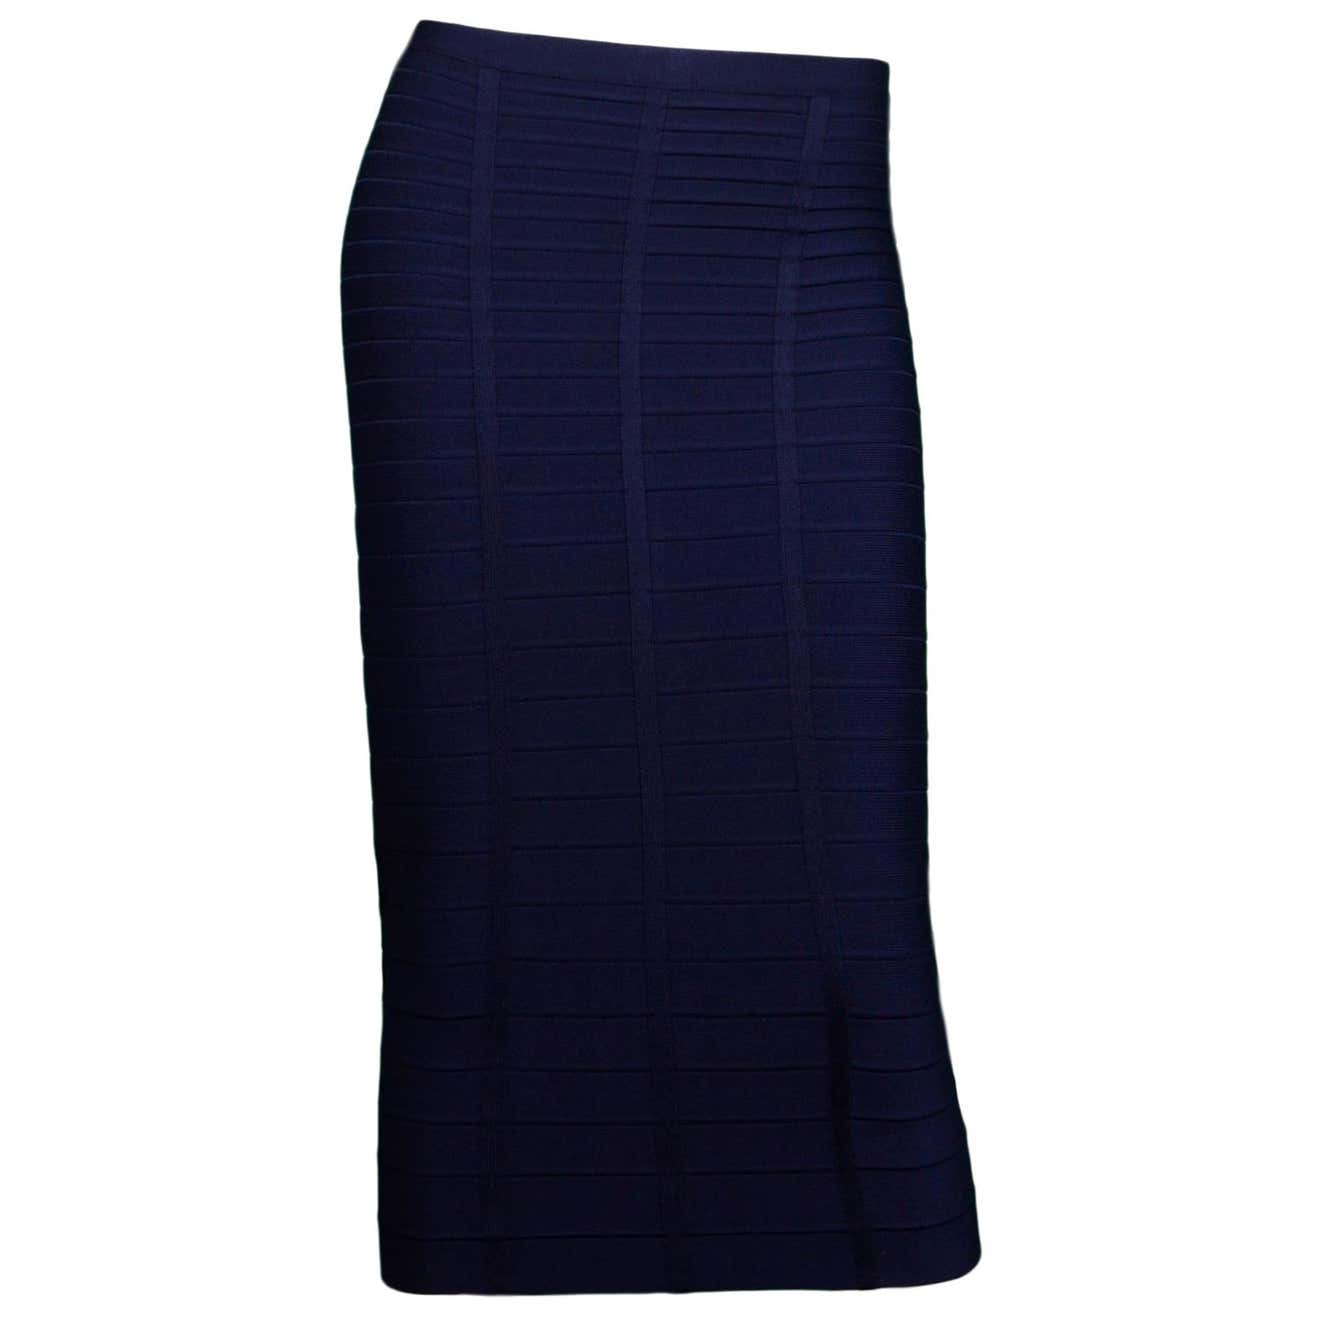 Herve Leger NWT Navy Pacific Blue Sia Bandage Skirt Sz L For Sale at ...